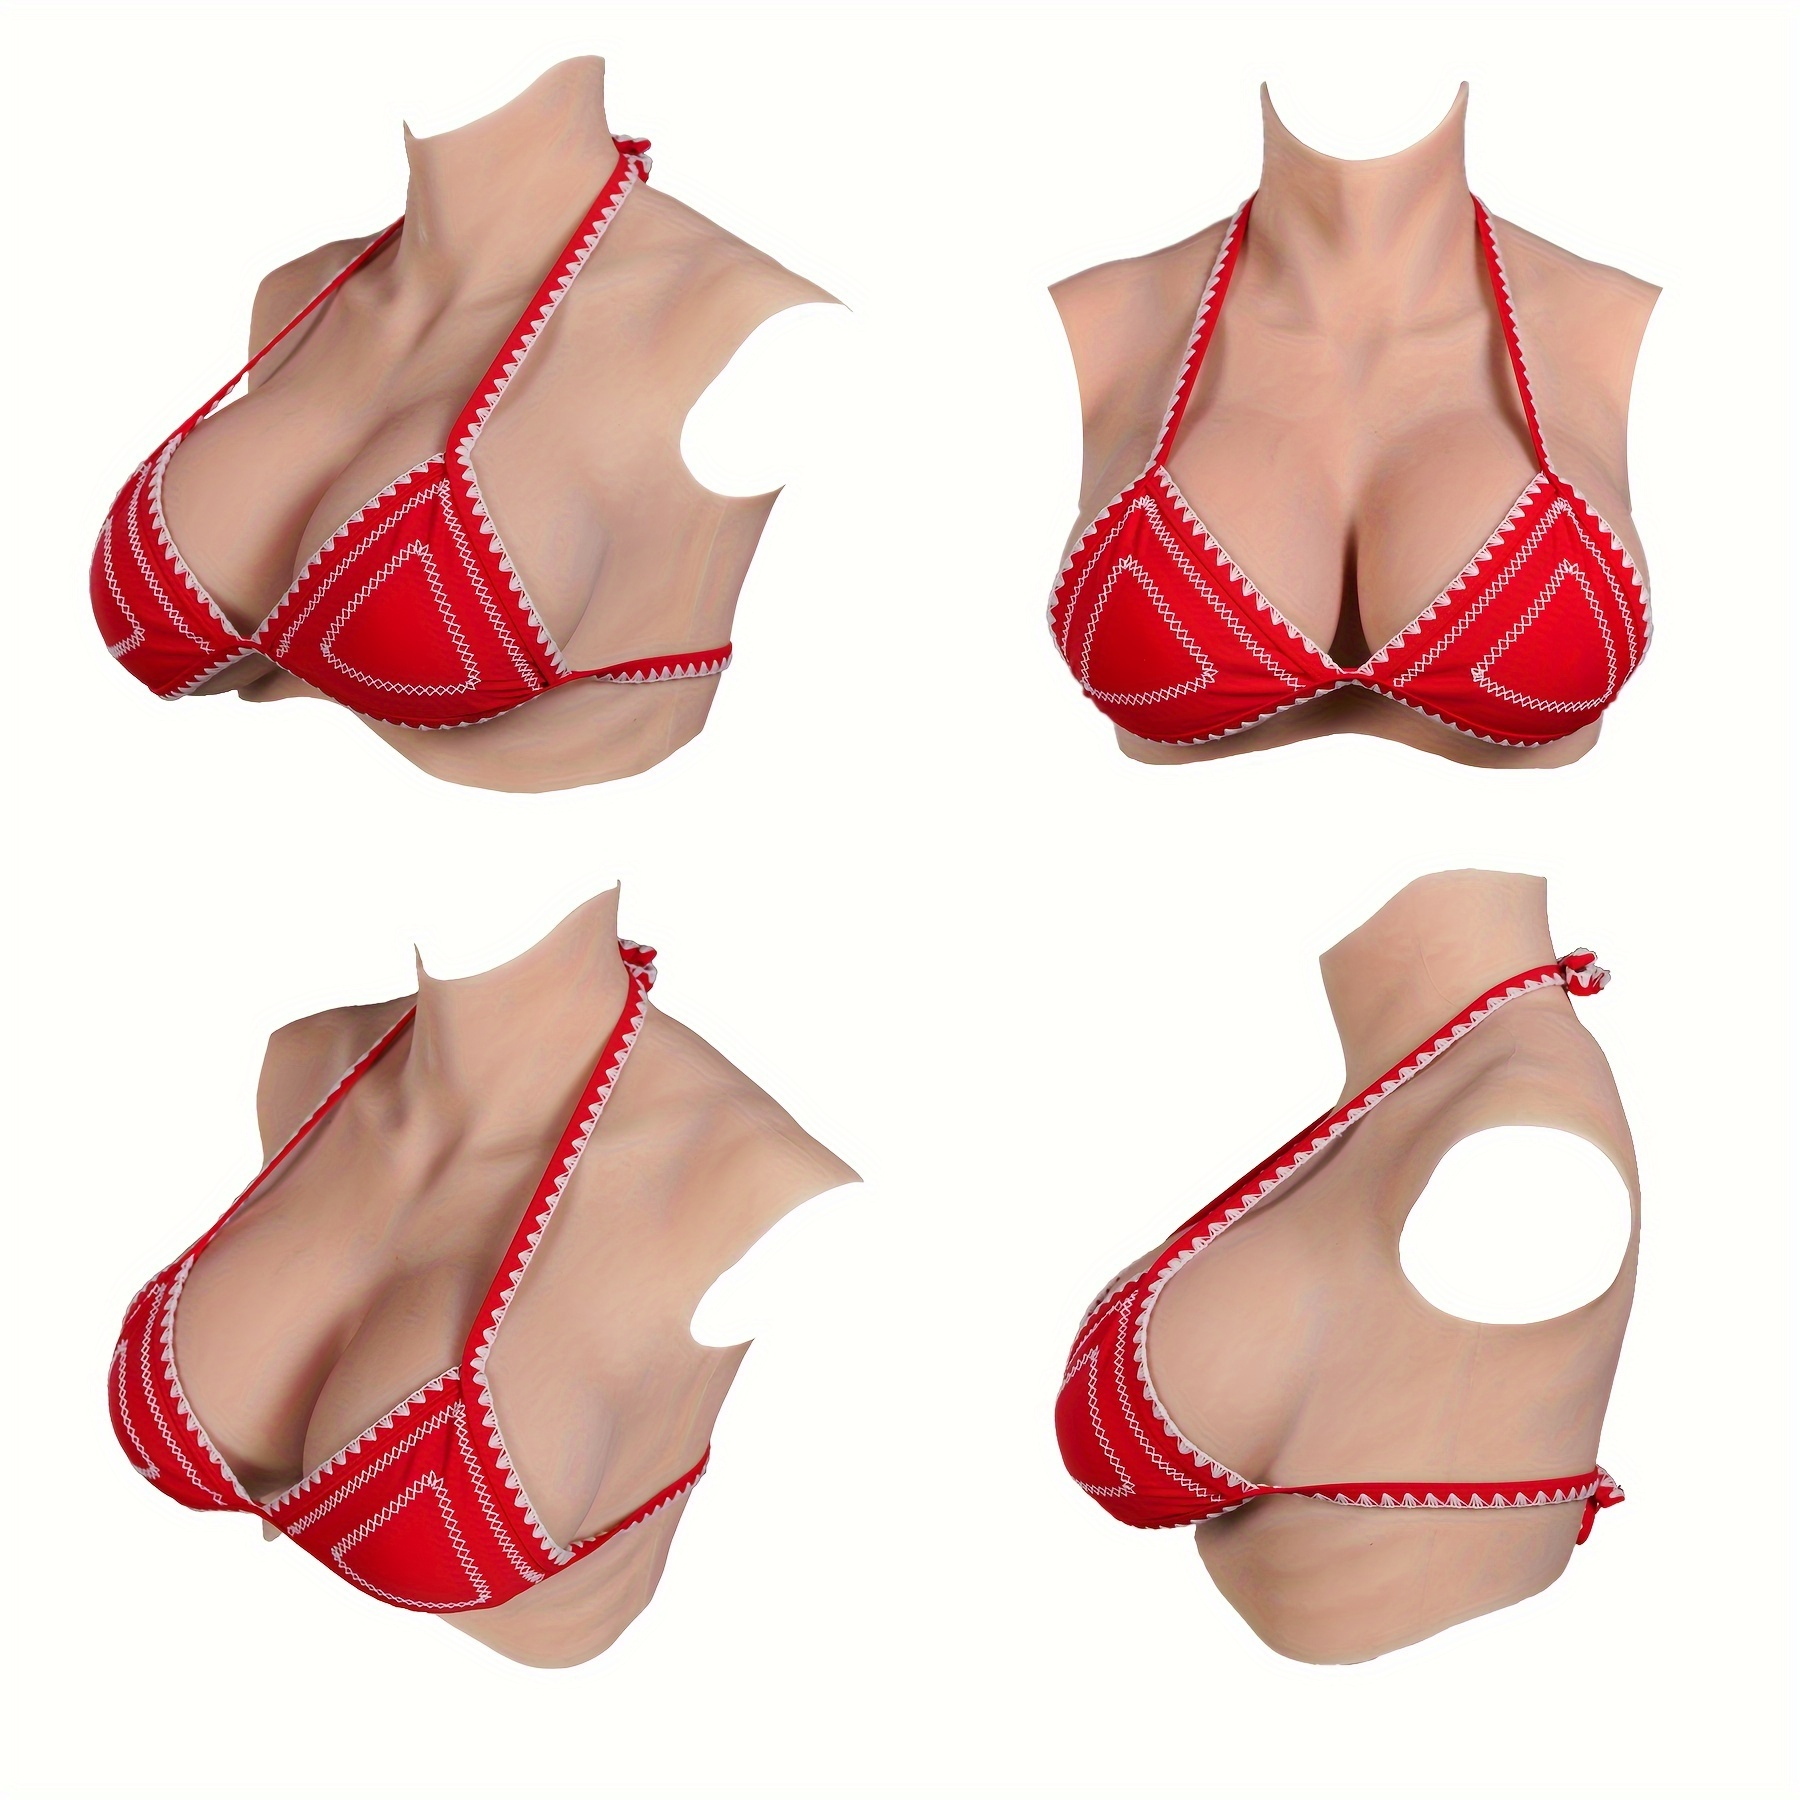 Realistic C-G Cup Silicone Breast Forms, Breast Plate, Fake Boobs